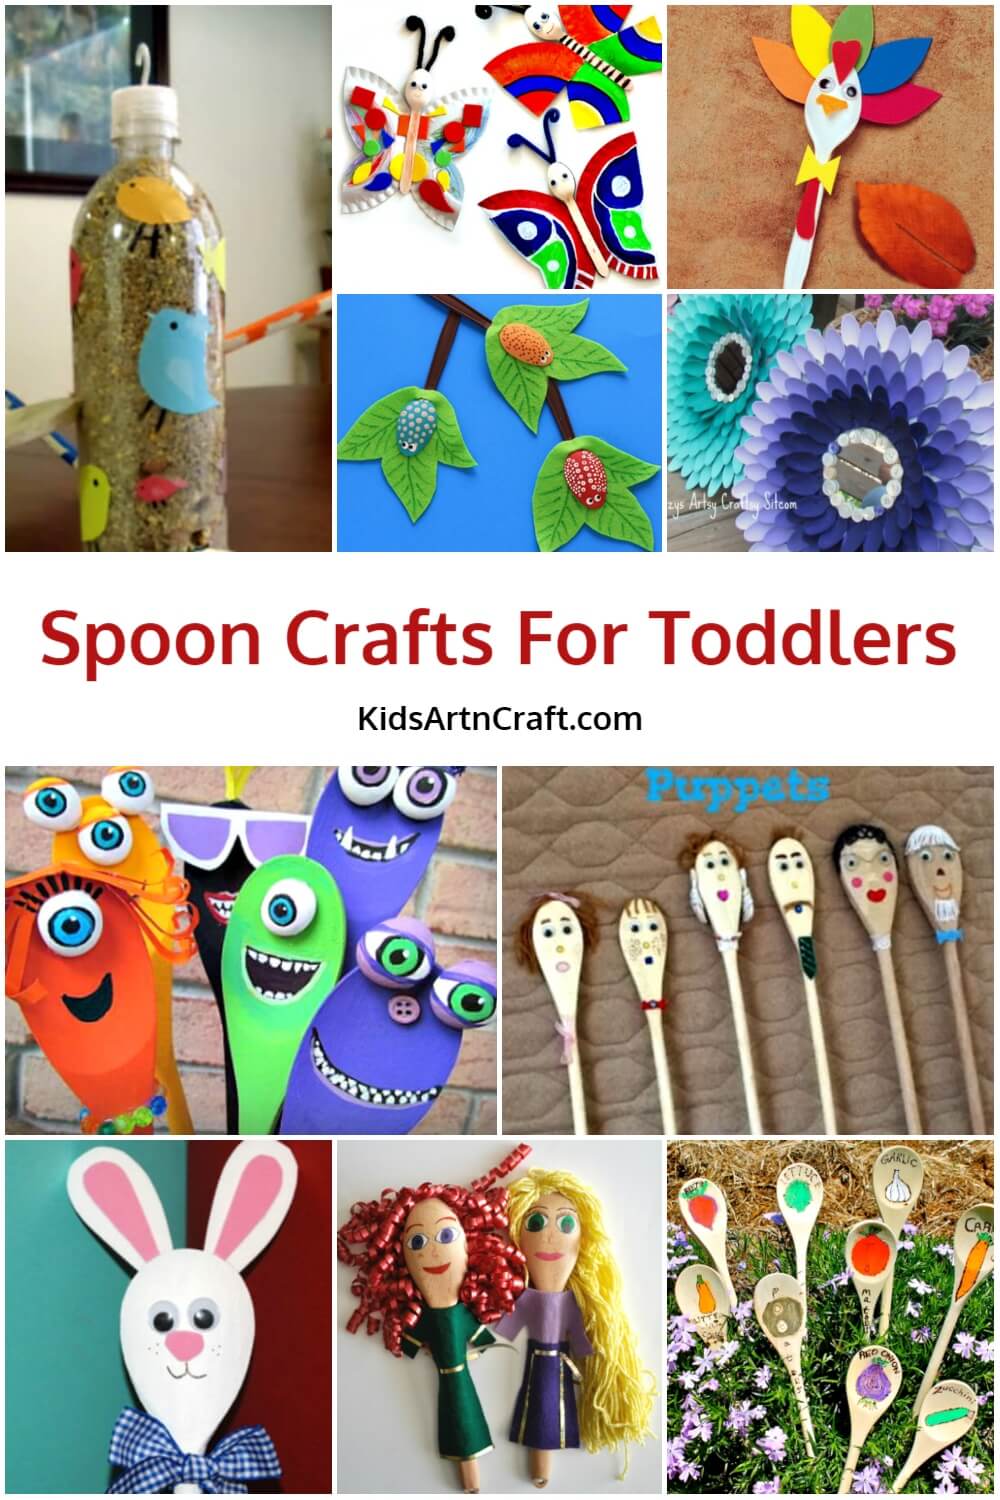 Simple and Interesting Spoon crafts for kids